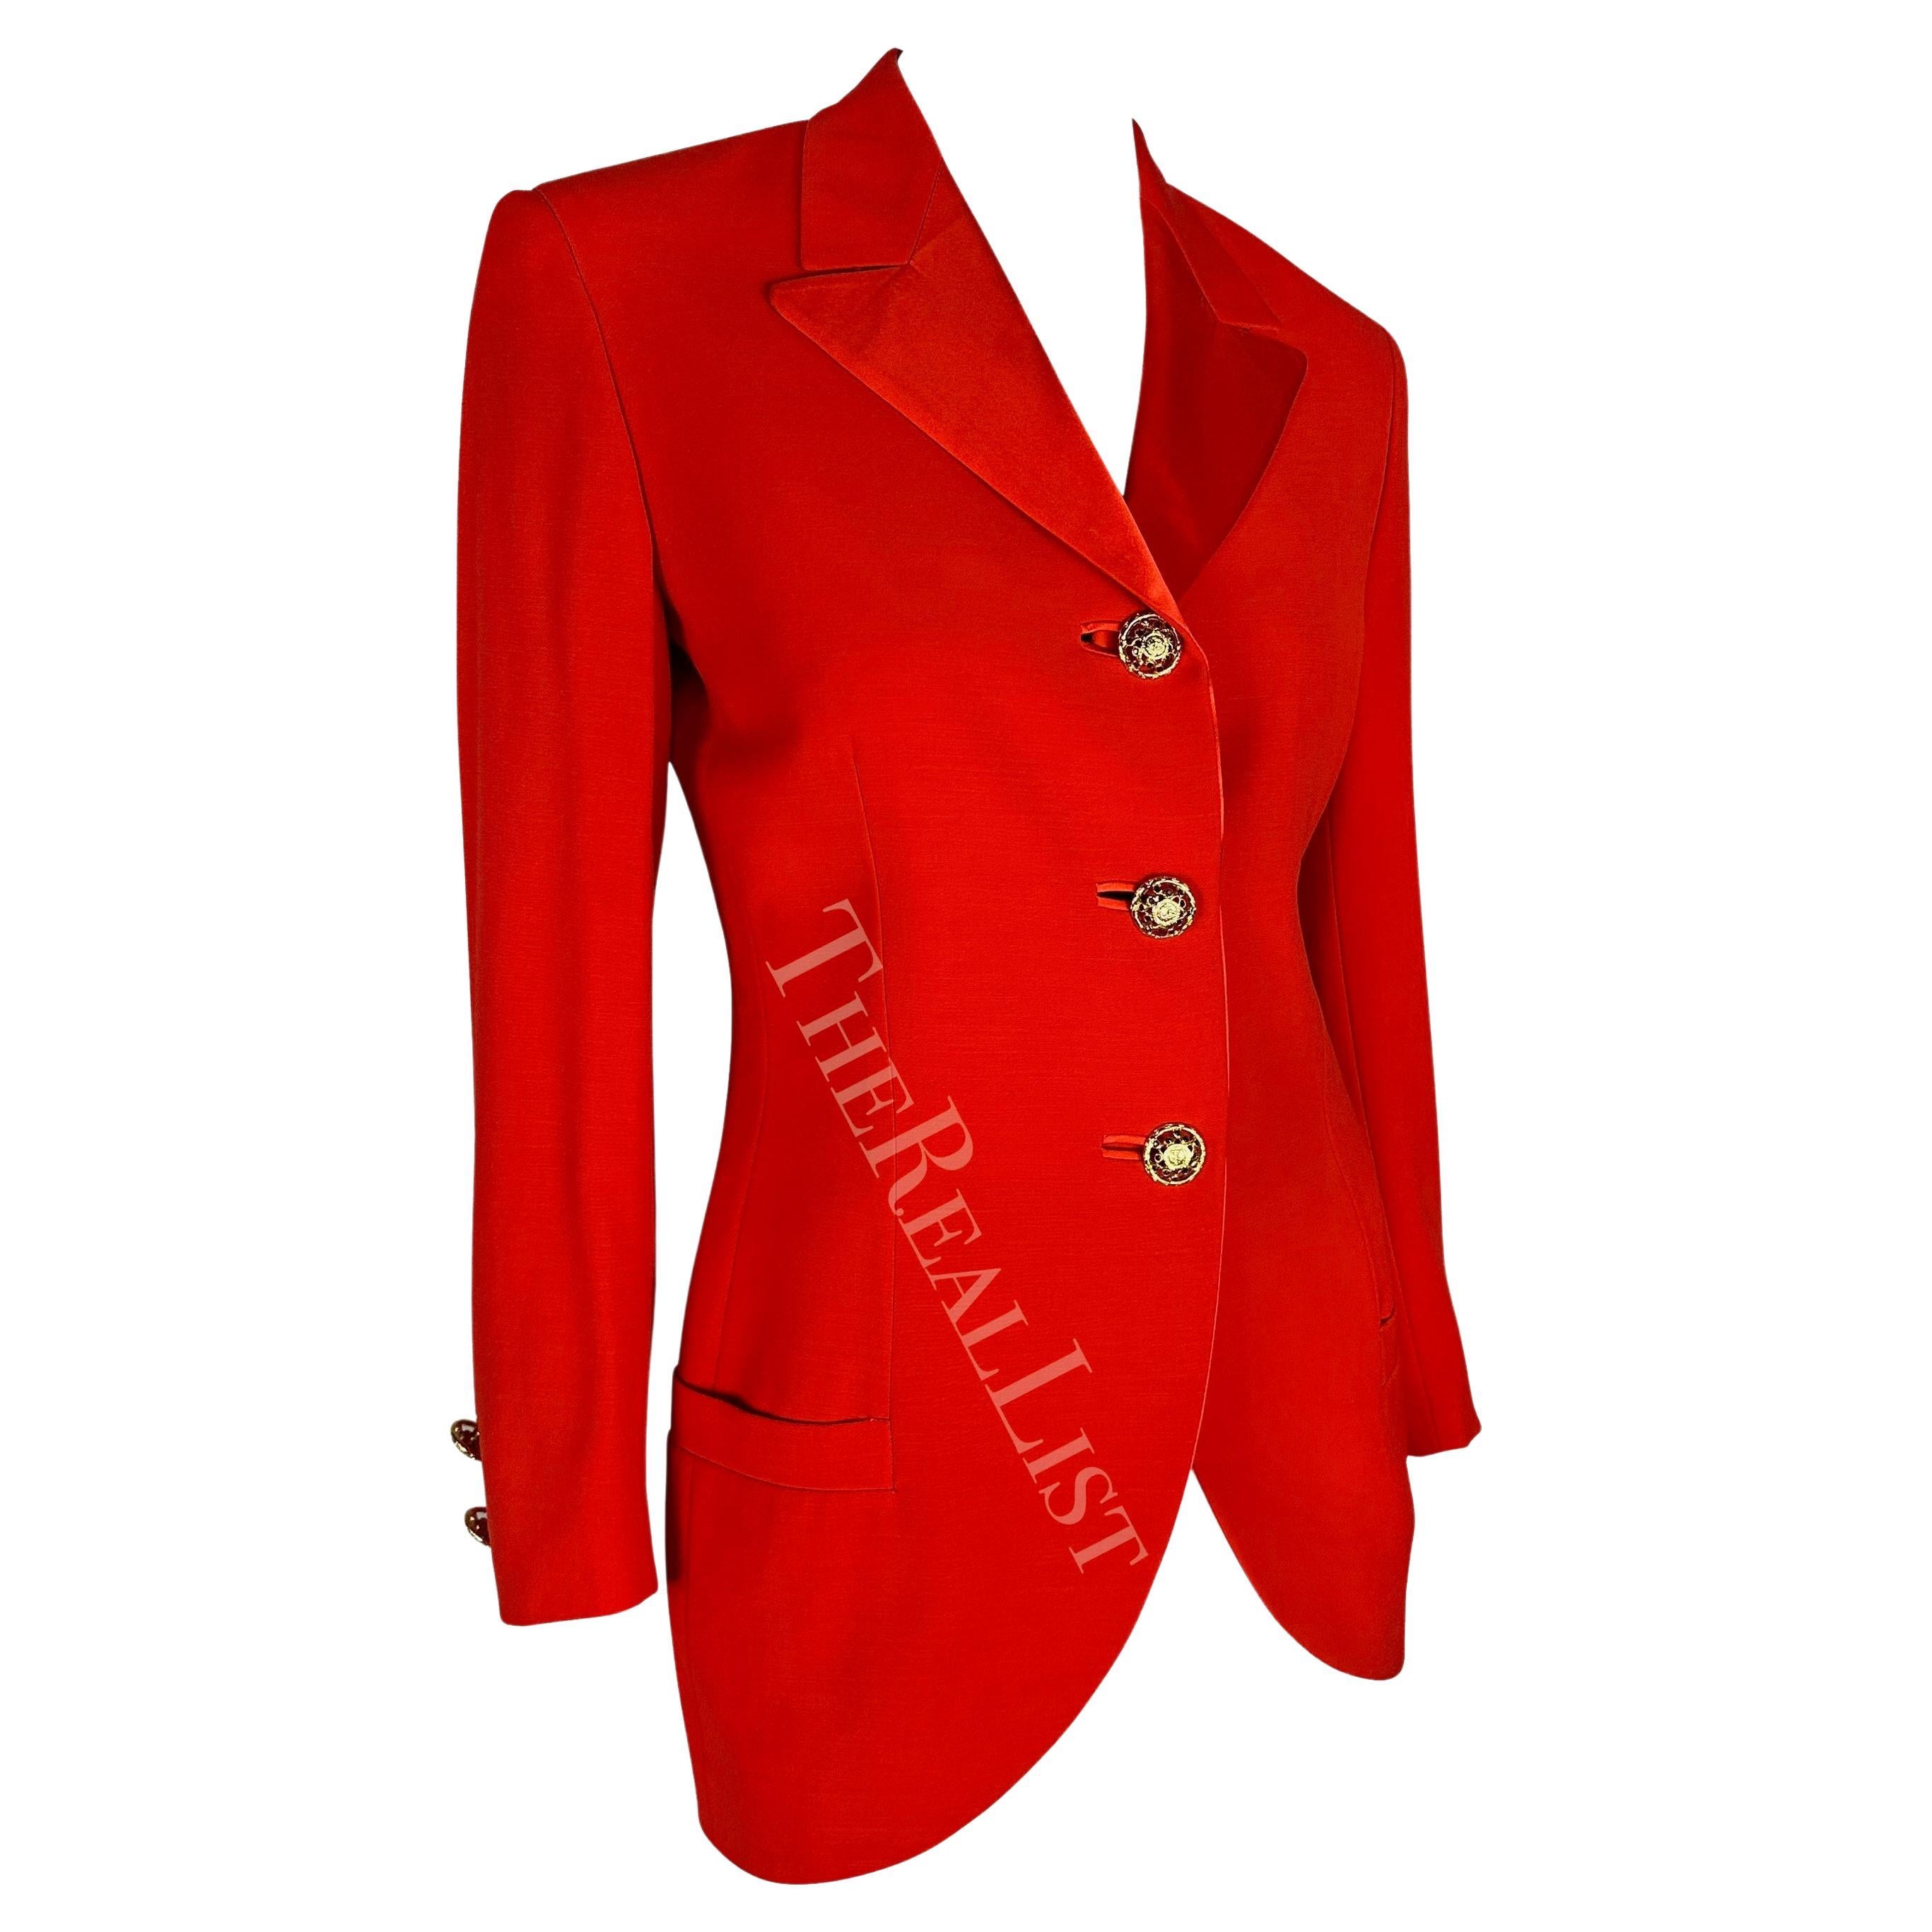 F/W 1992 Gianni Versace Couture Bondage (Miss S&M) Runway Collection Red Blazer For Sale 8